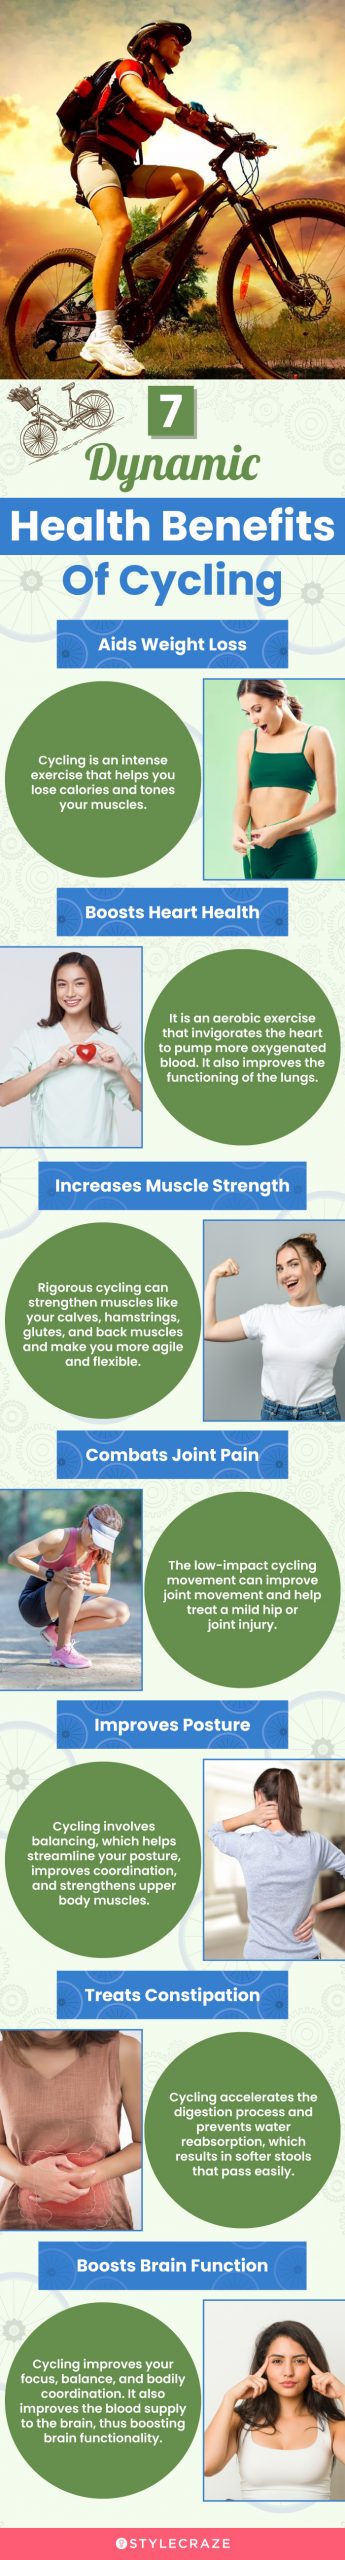 7 dynamic health benefits of cycling (infographic)